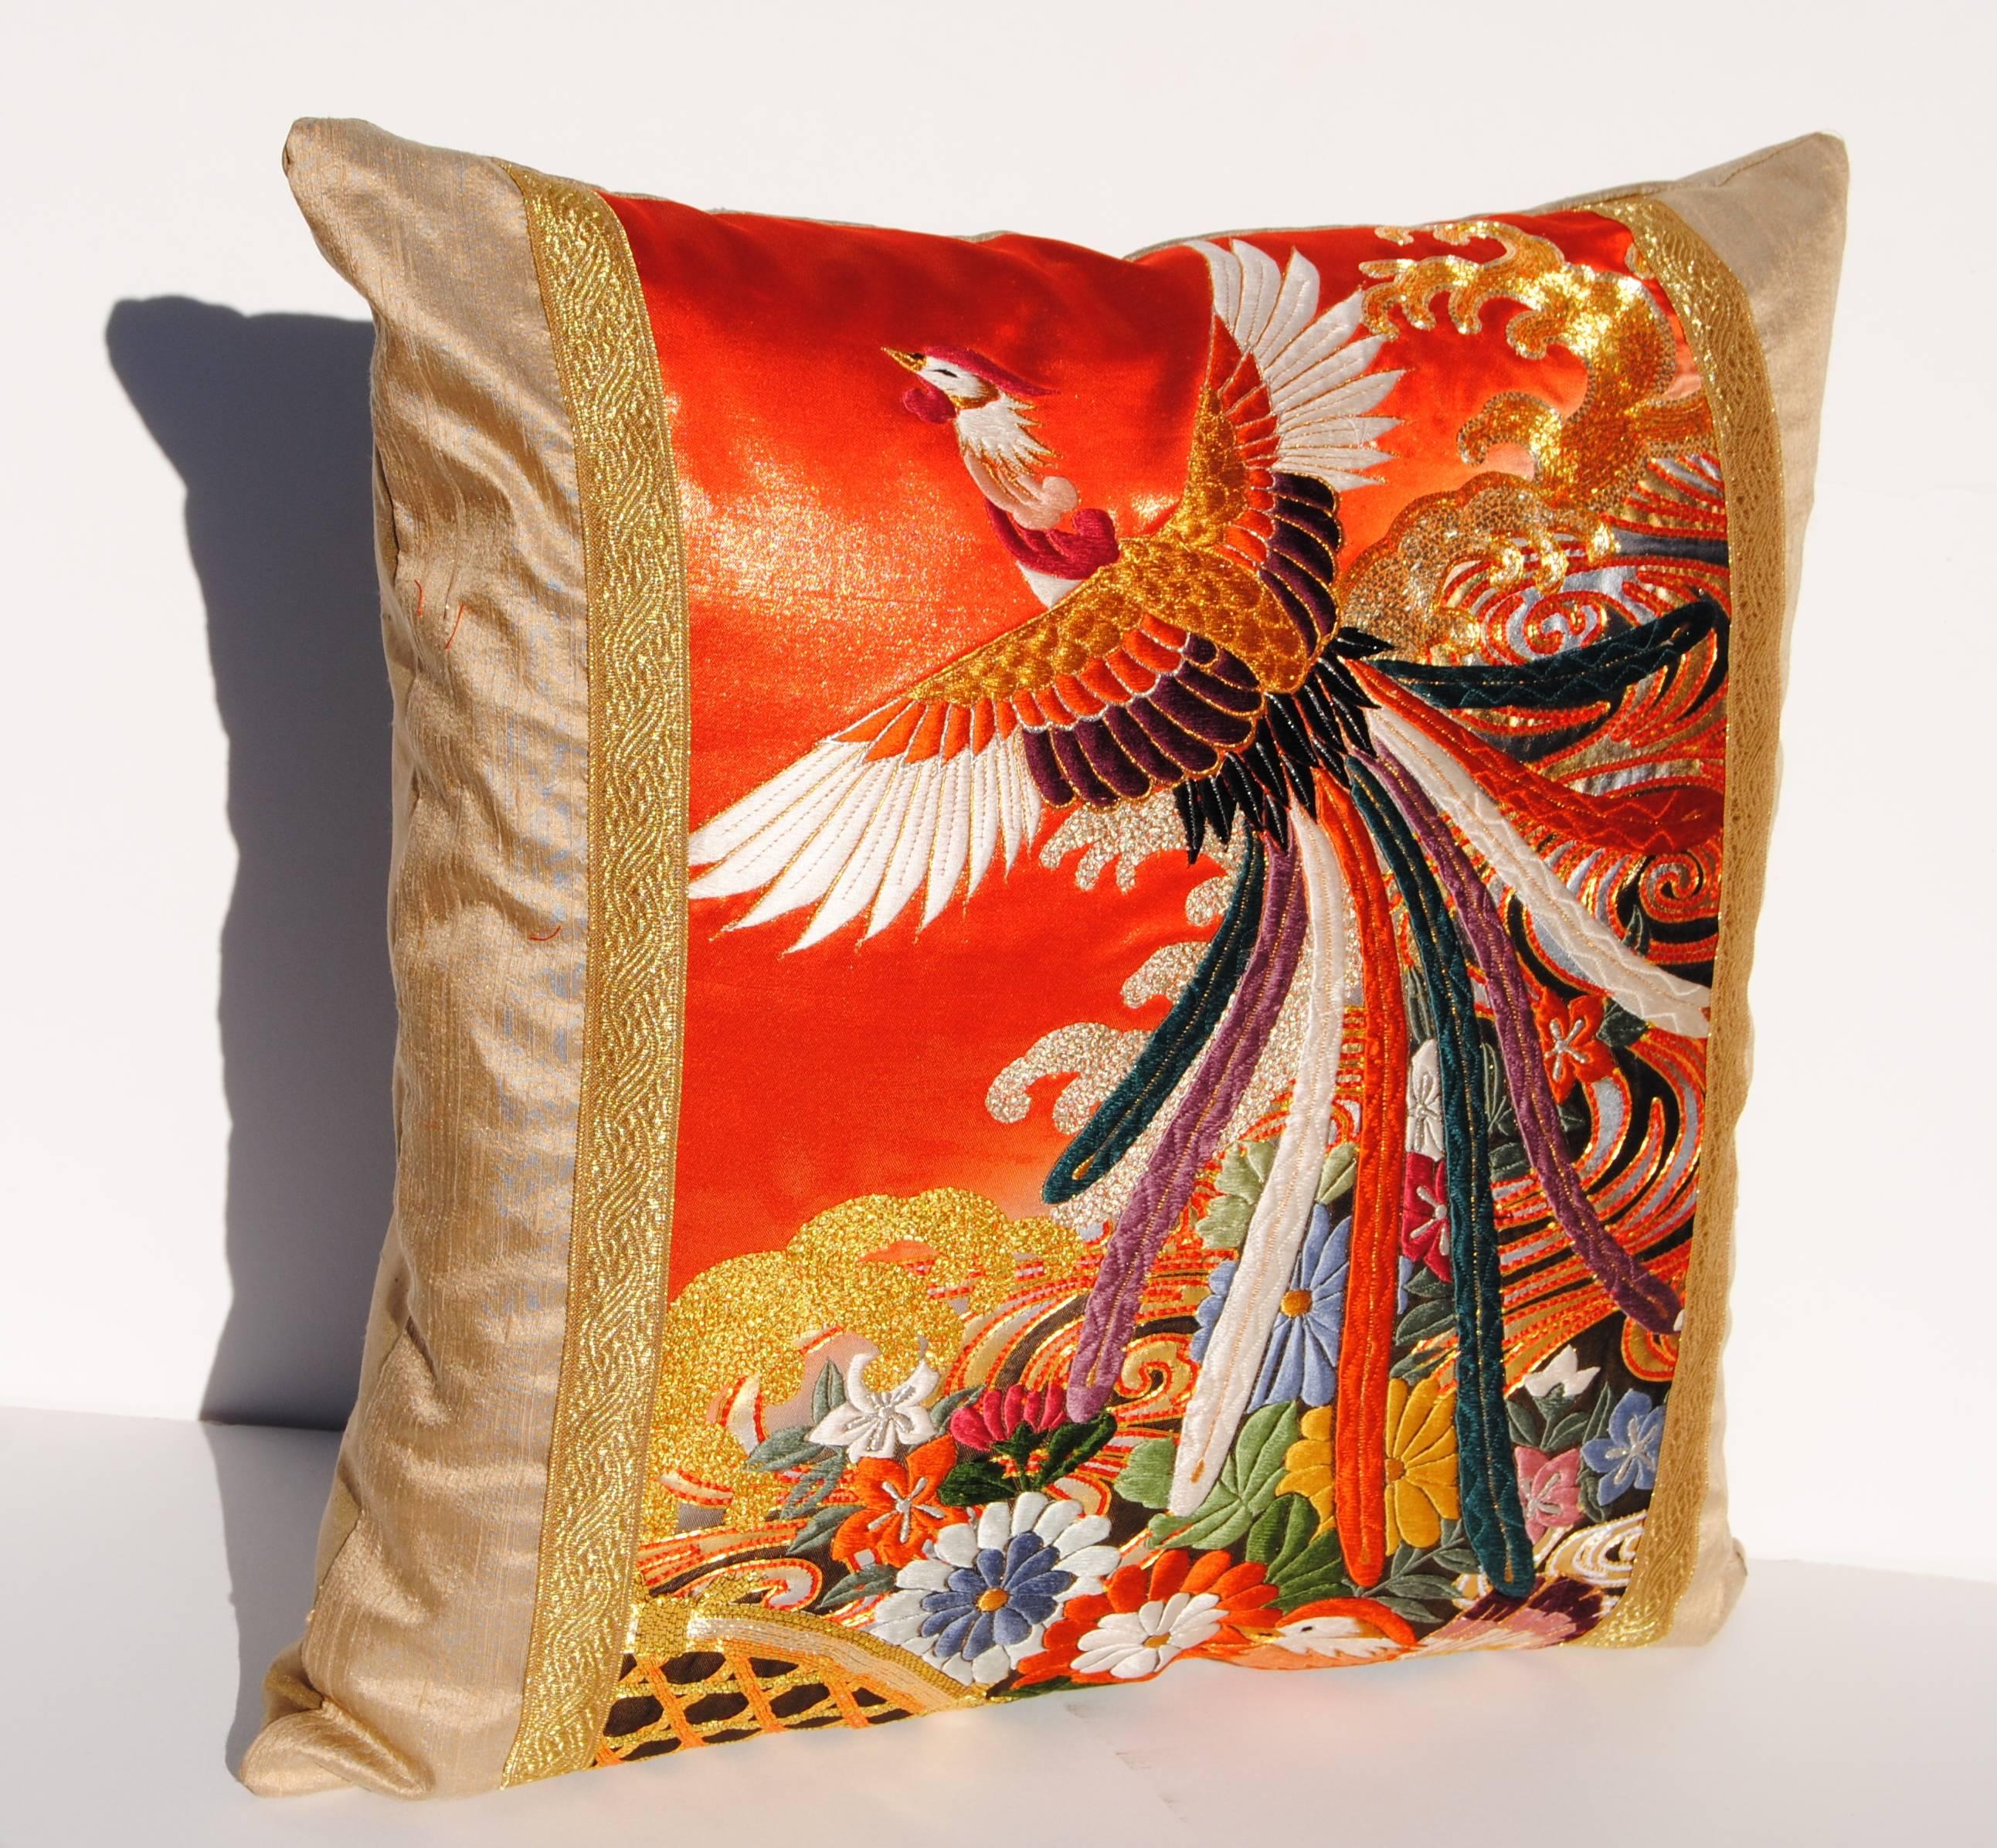 Custom pillow cut from a vintage Japanese silk embroidered uchikake wedding kimono. The orange or red silk is embroidered with silk and metallic threads. The pillow is faced with a cream silk and gold metallic trim. It is backed with a wool or silk,